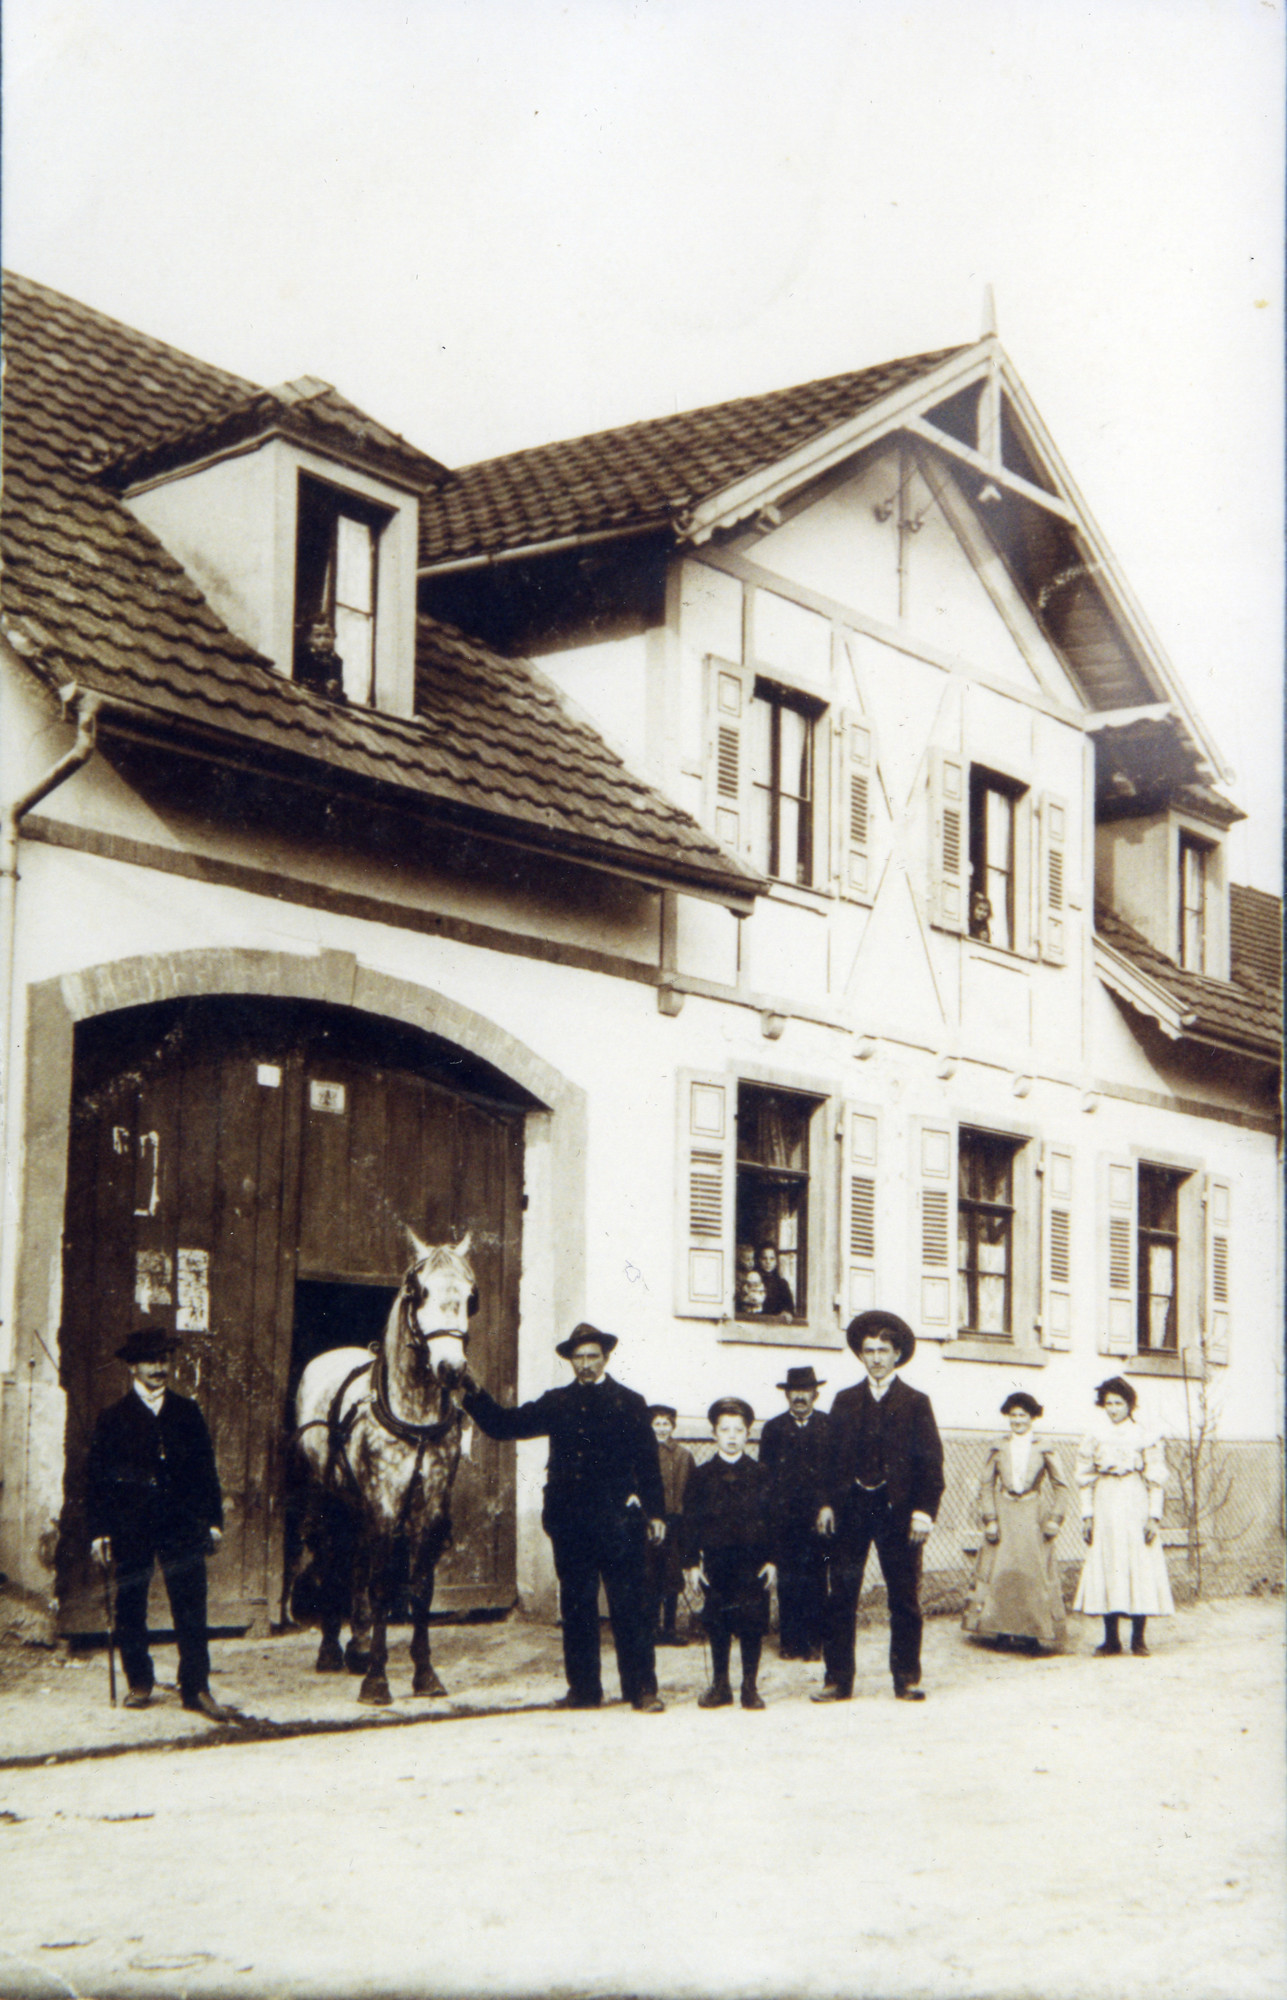 A German Jewish horsetrader sells a horse on the streets of Ihringen.

Among those pictured is Daniel Judas (center).  Daniel was killed in a motorcycle accident.